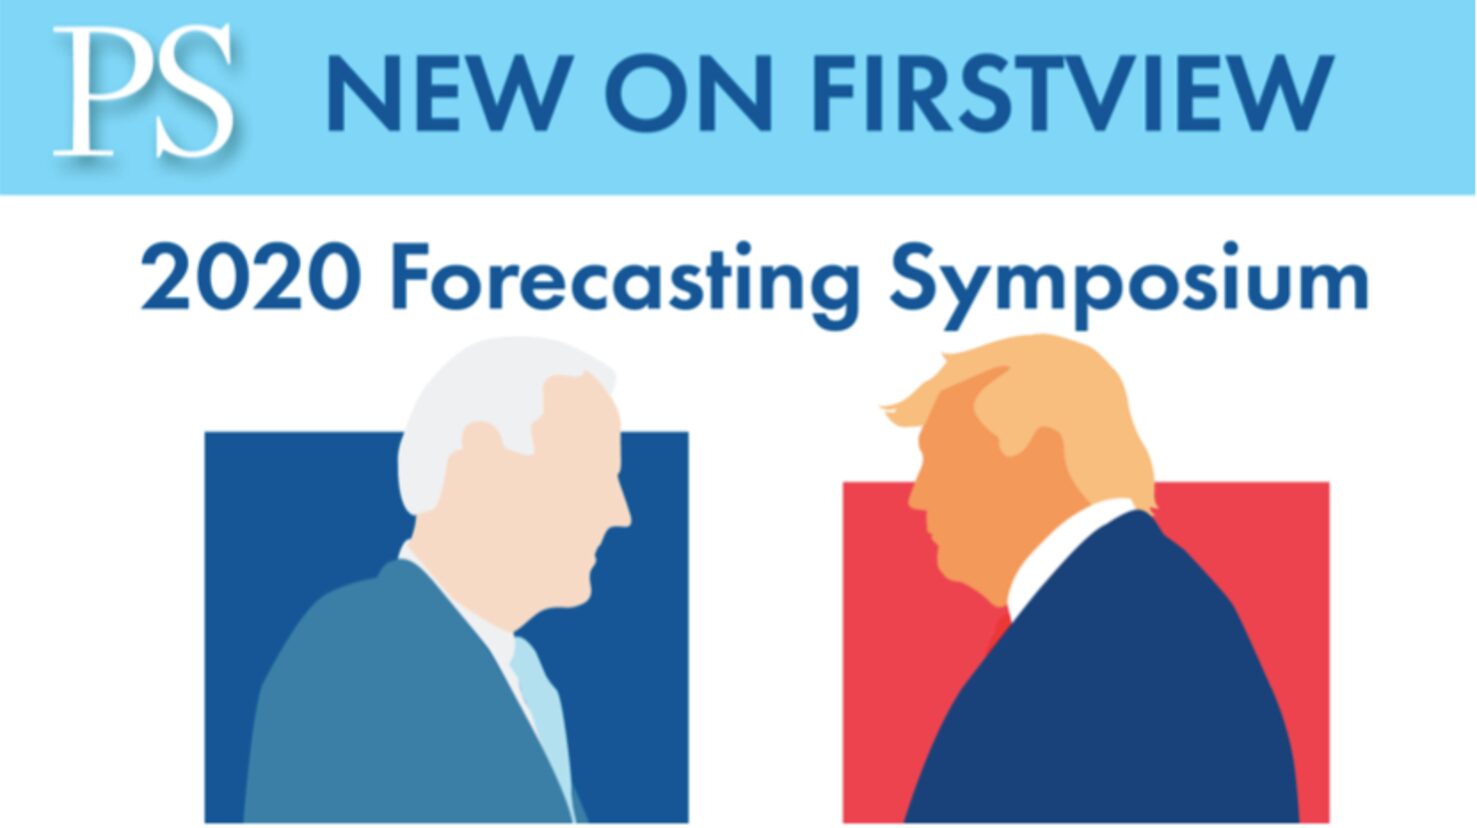 2020 Presidential Election Forecasting symposium co-edited by Prof. Charles P. Tien in  PS: Political Science & Politics